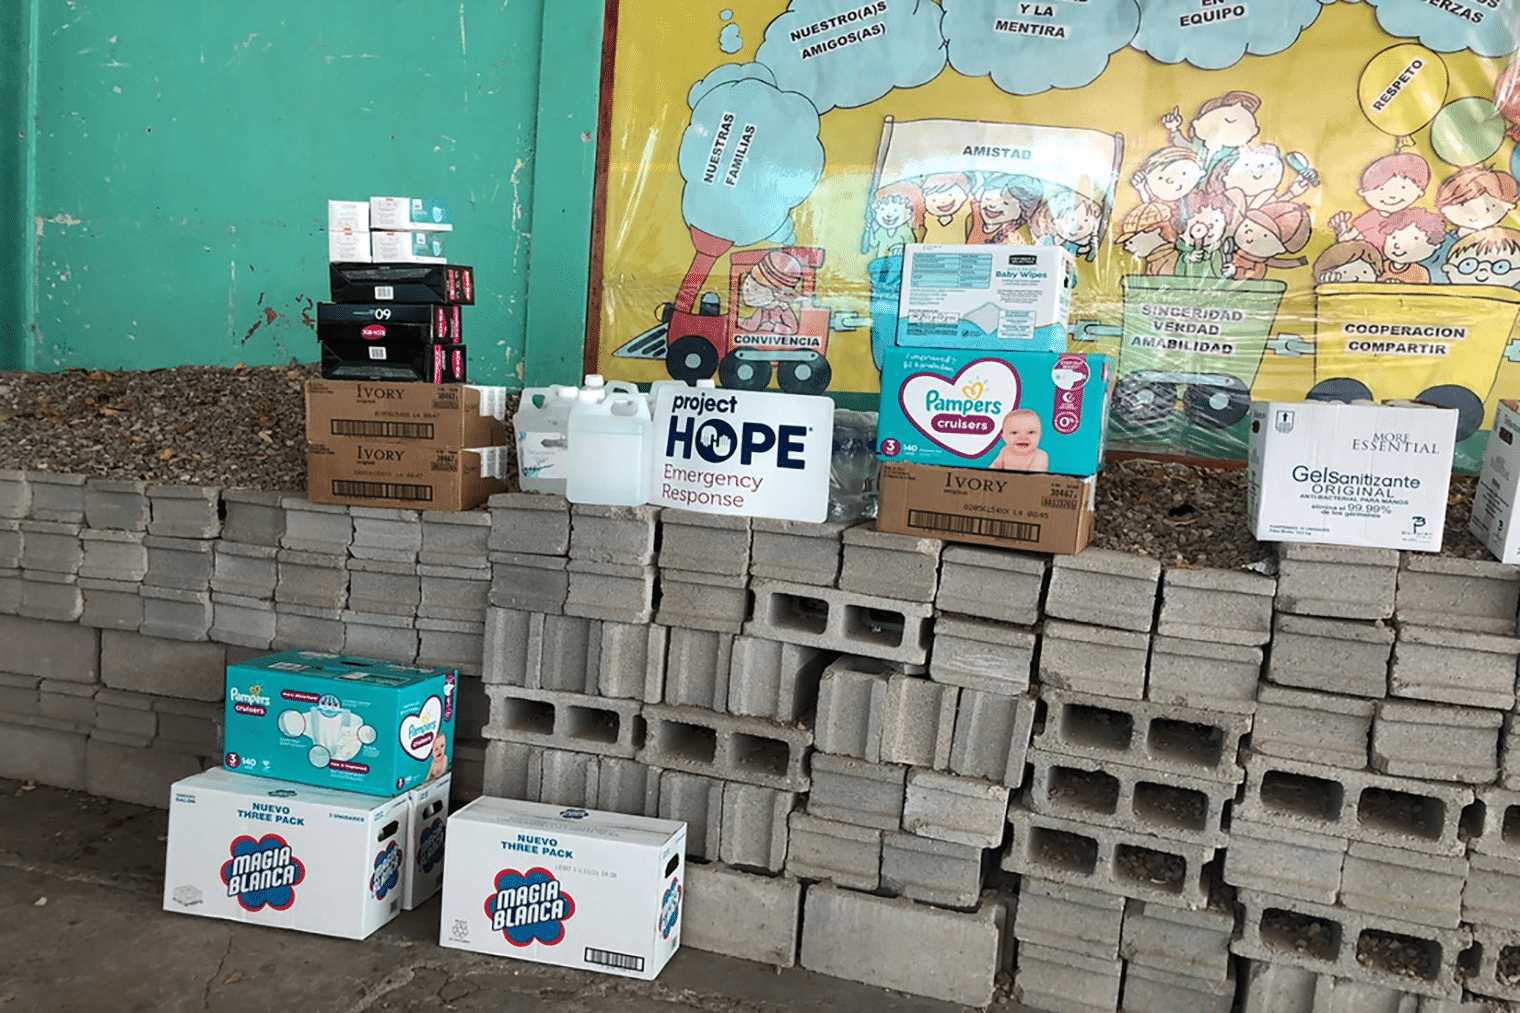 collection of diapers and water for shelter needs